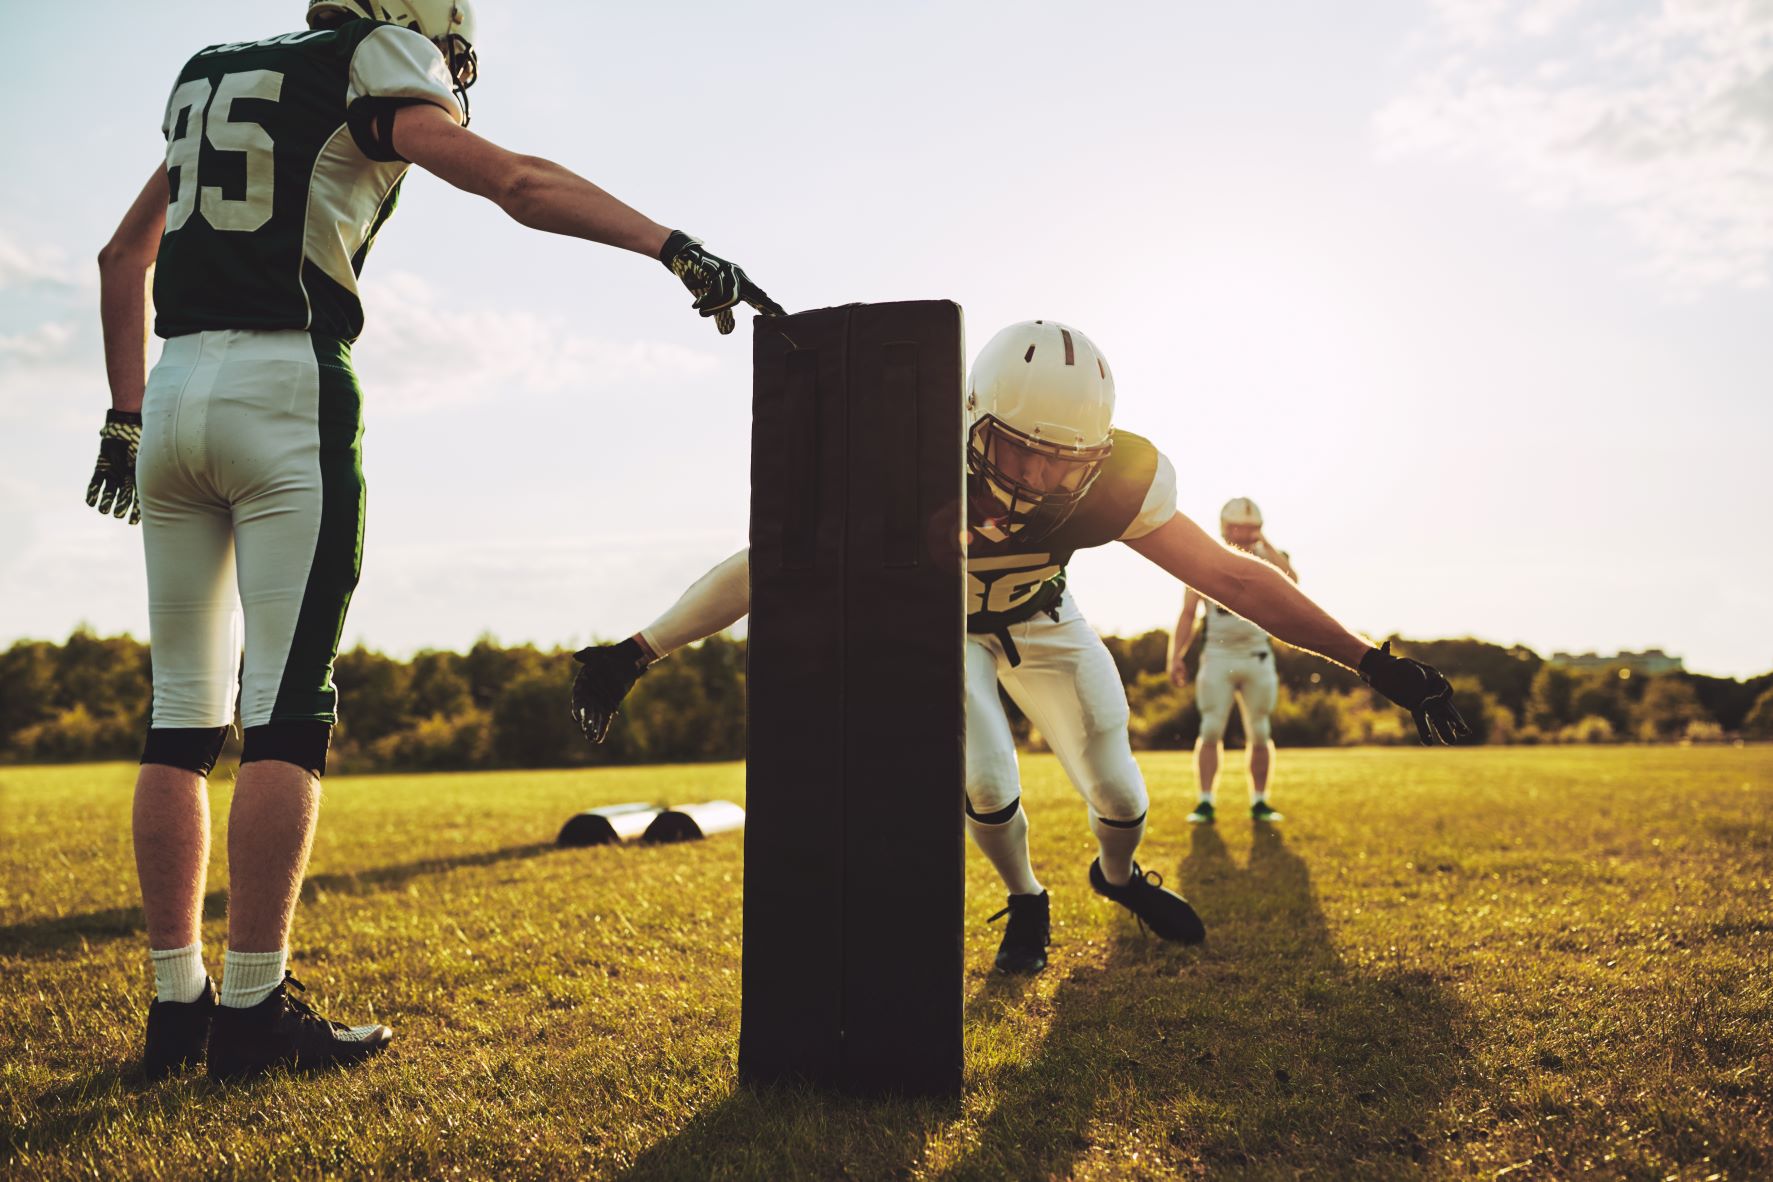 The benefits of playing American football – Why the athletes are compensated so handsomely